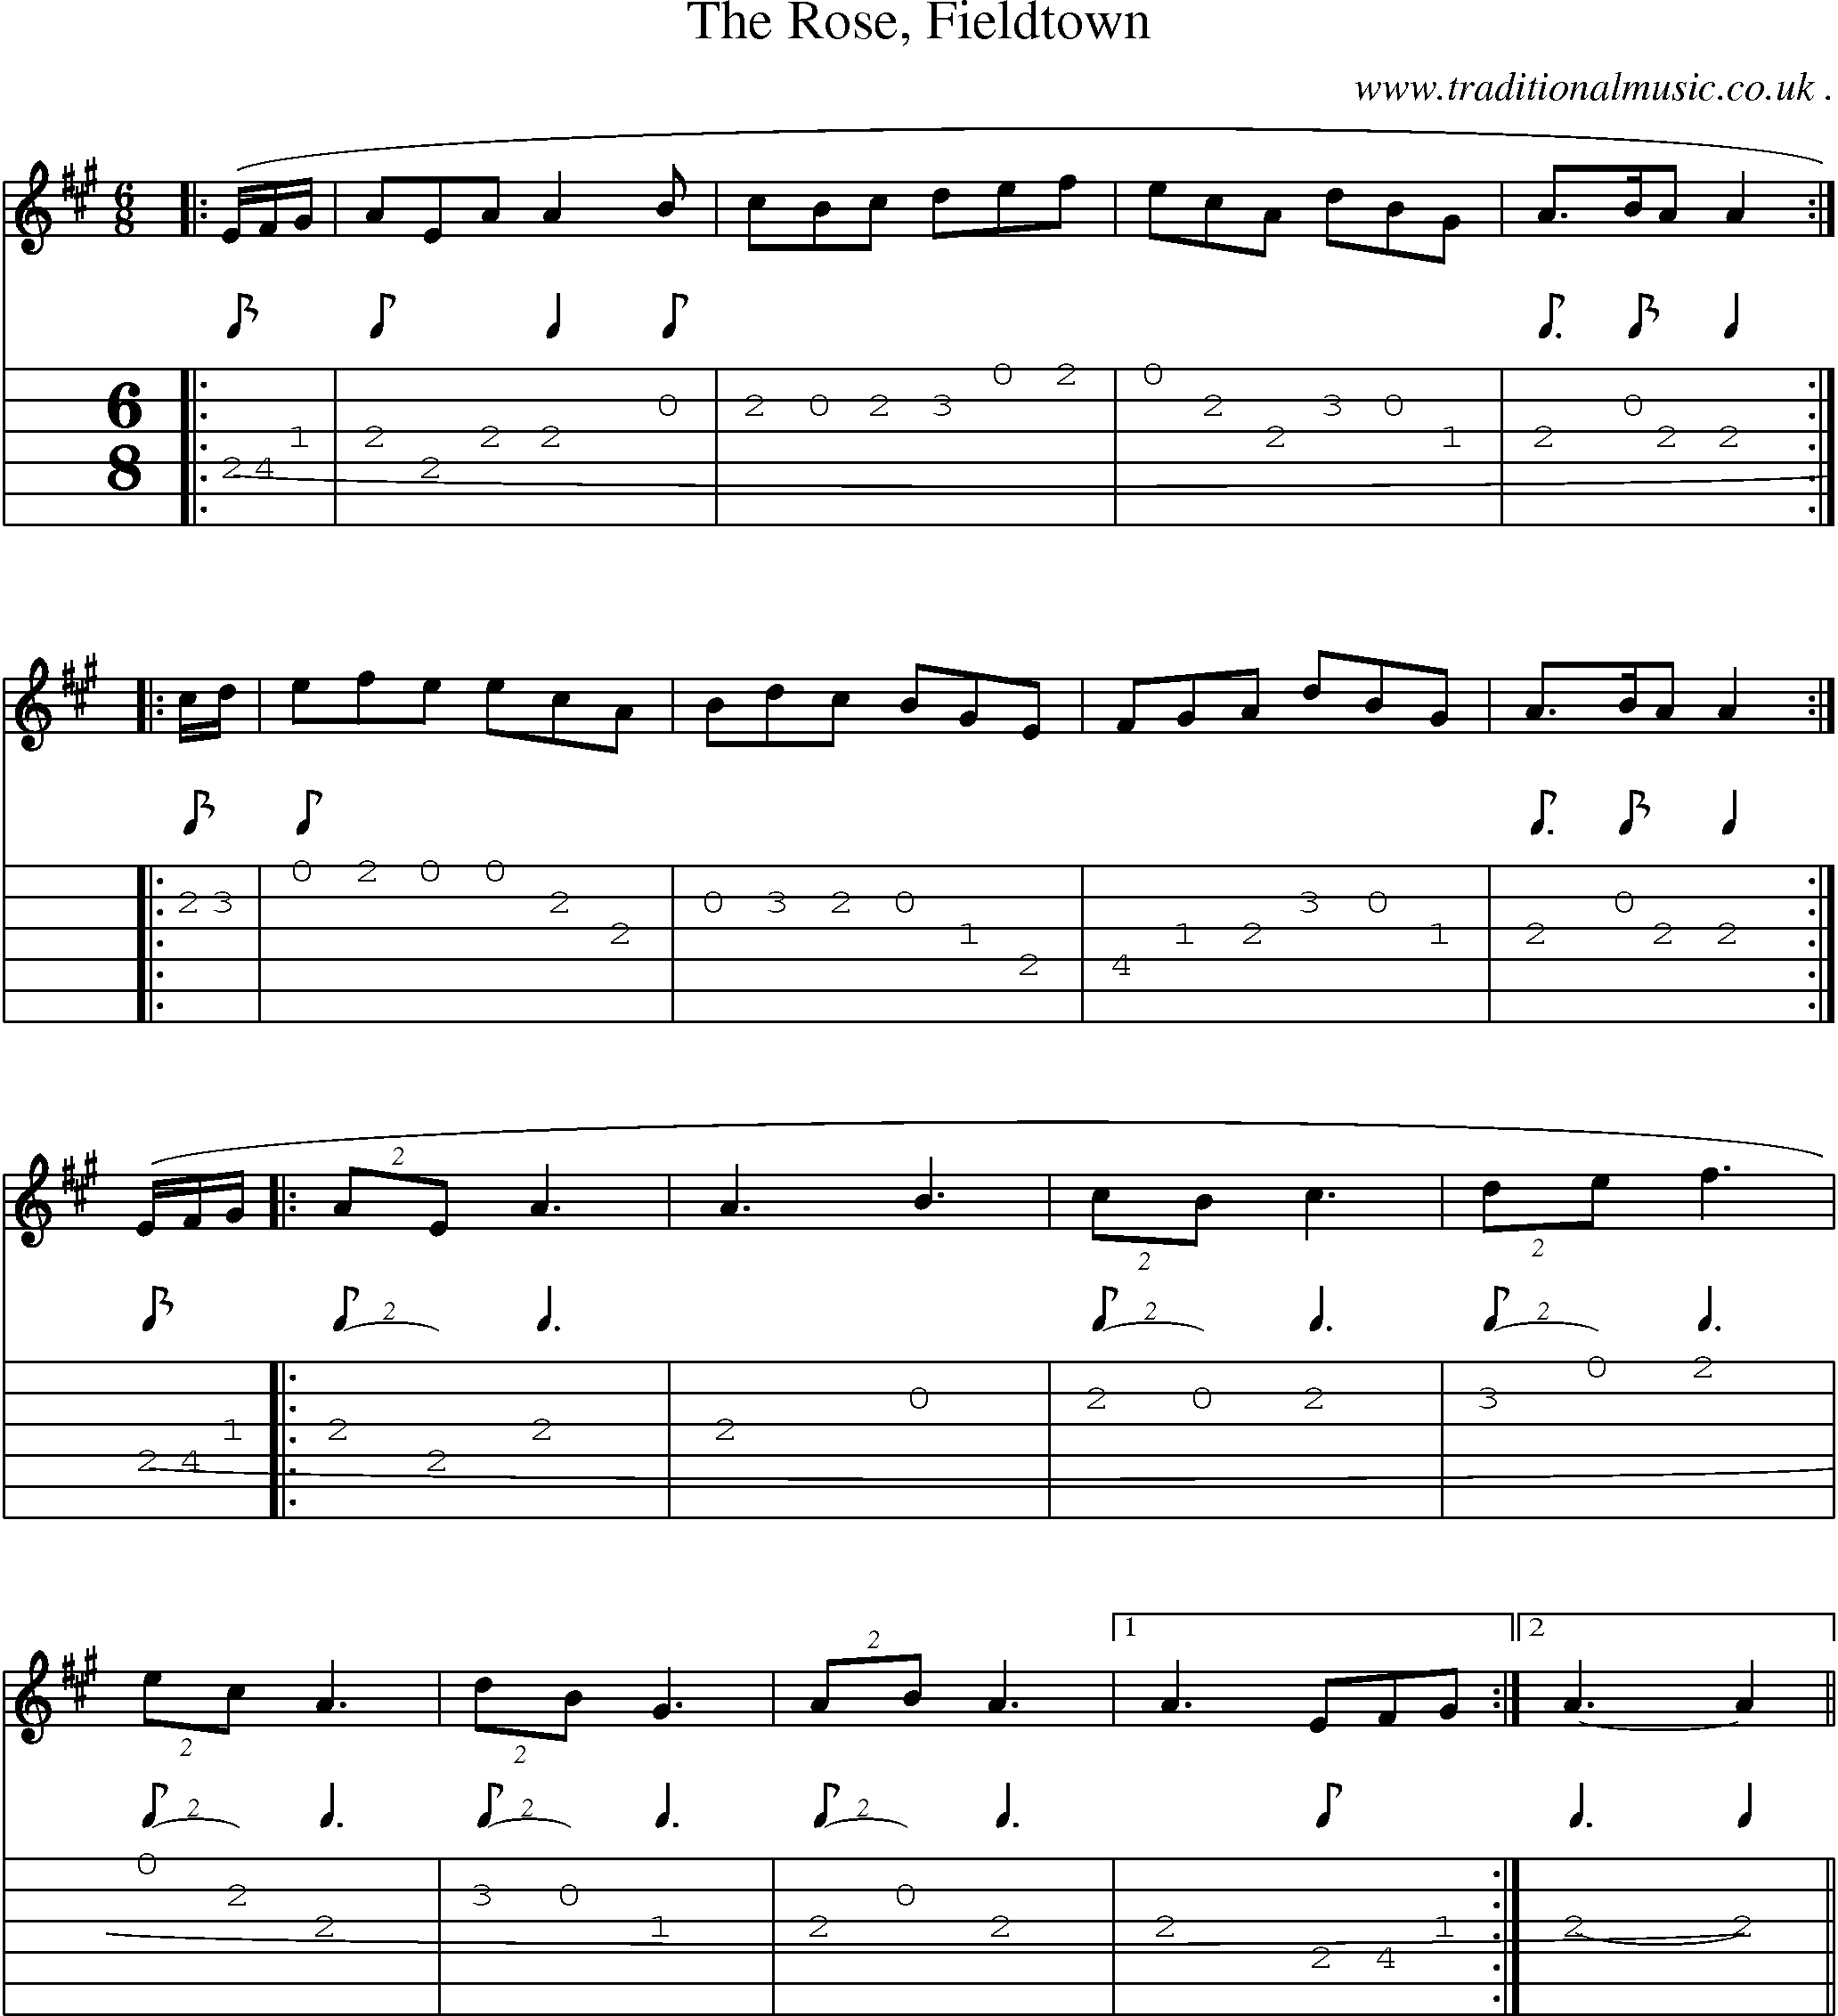 Sheet-Music and Guitar Tabs for The Rose Fieldtown